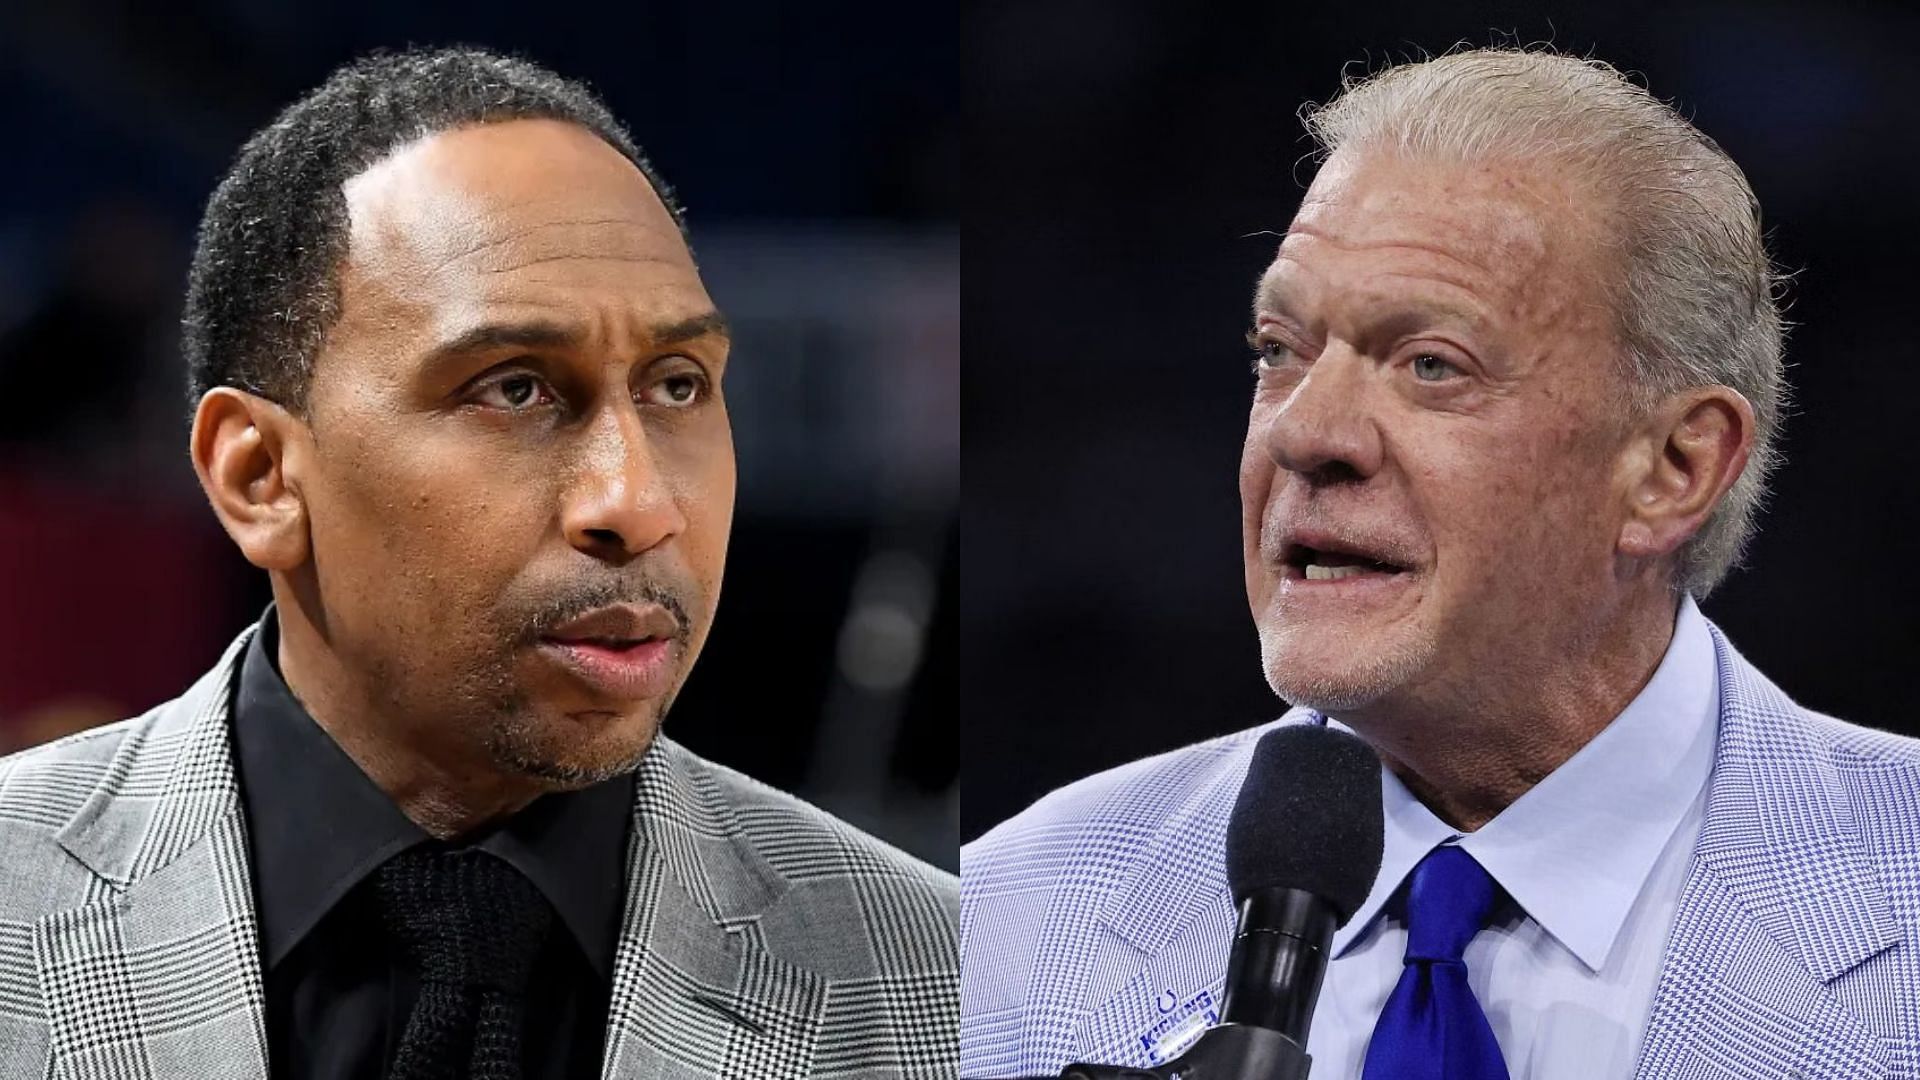 Jim Irsay has threatened to sue Stephen A Smith over comments made on First Take